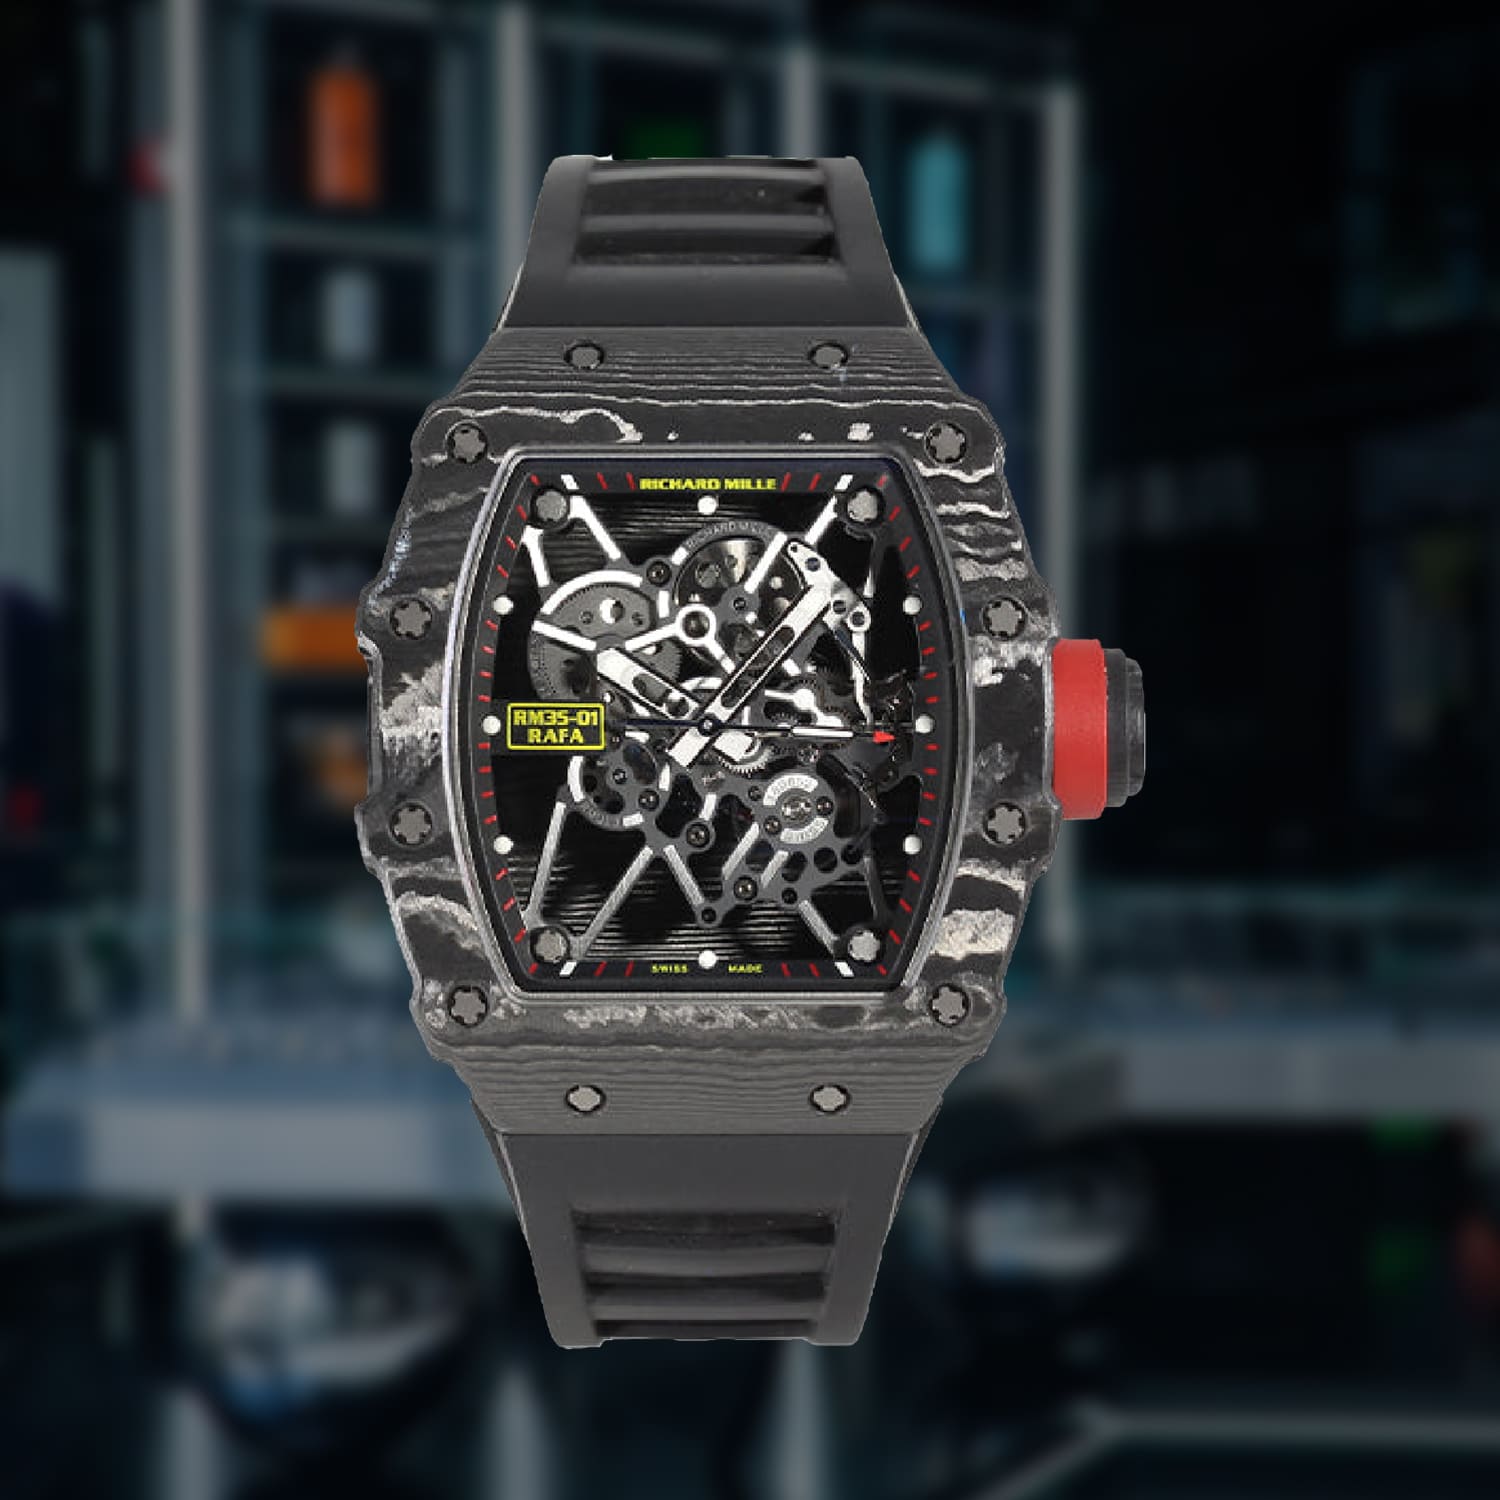 Richard Mille RM35-01 Rafael Nadal | The Watch Meister